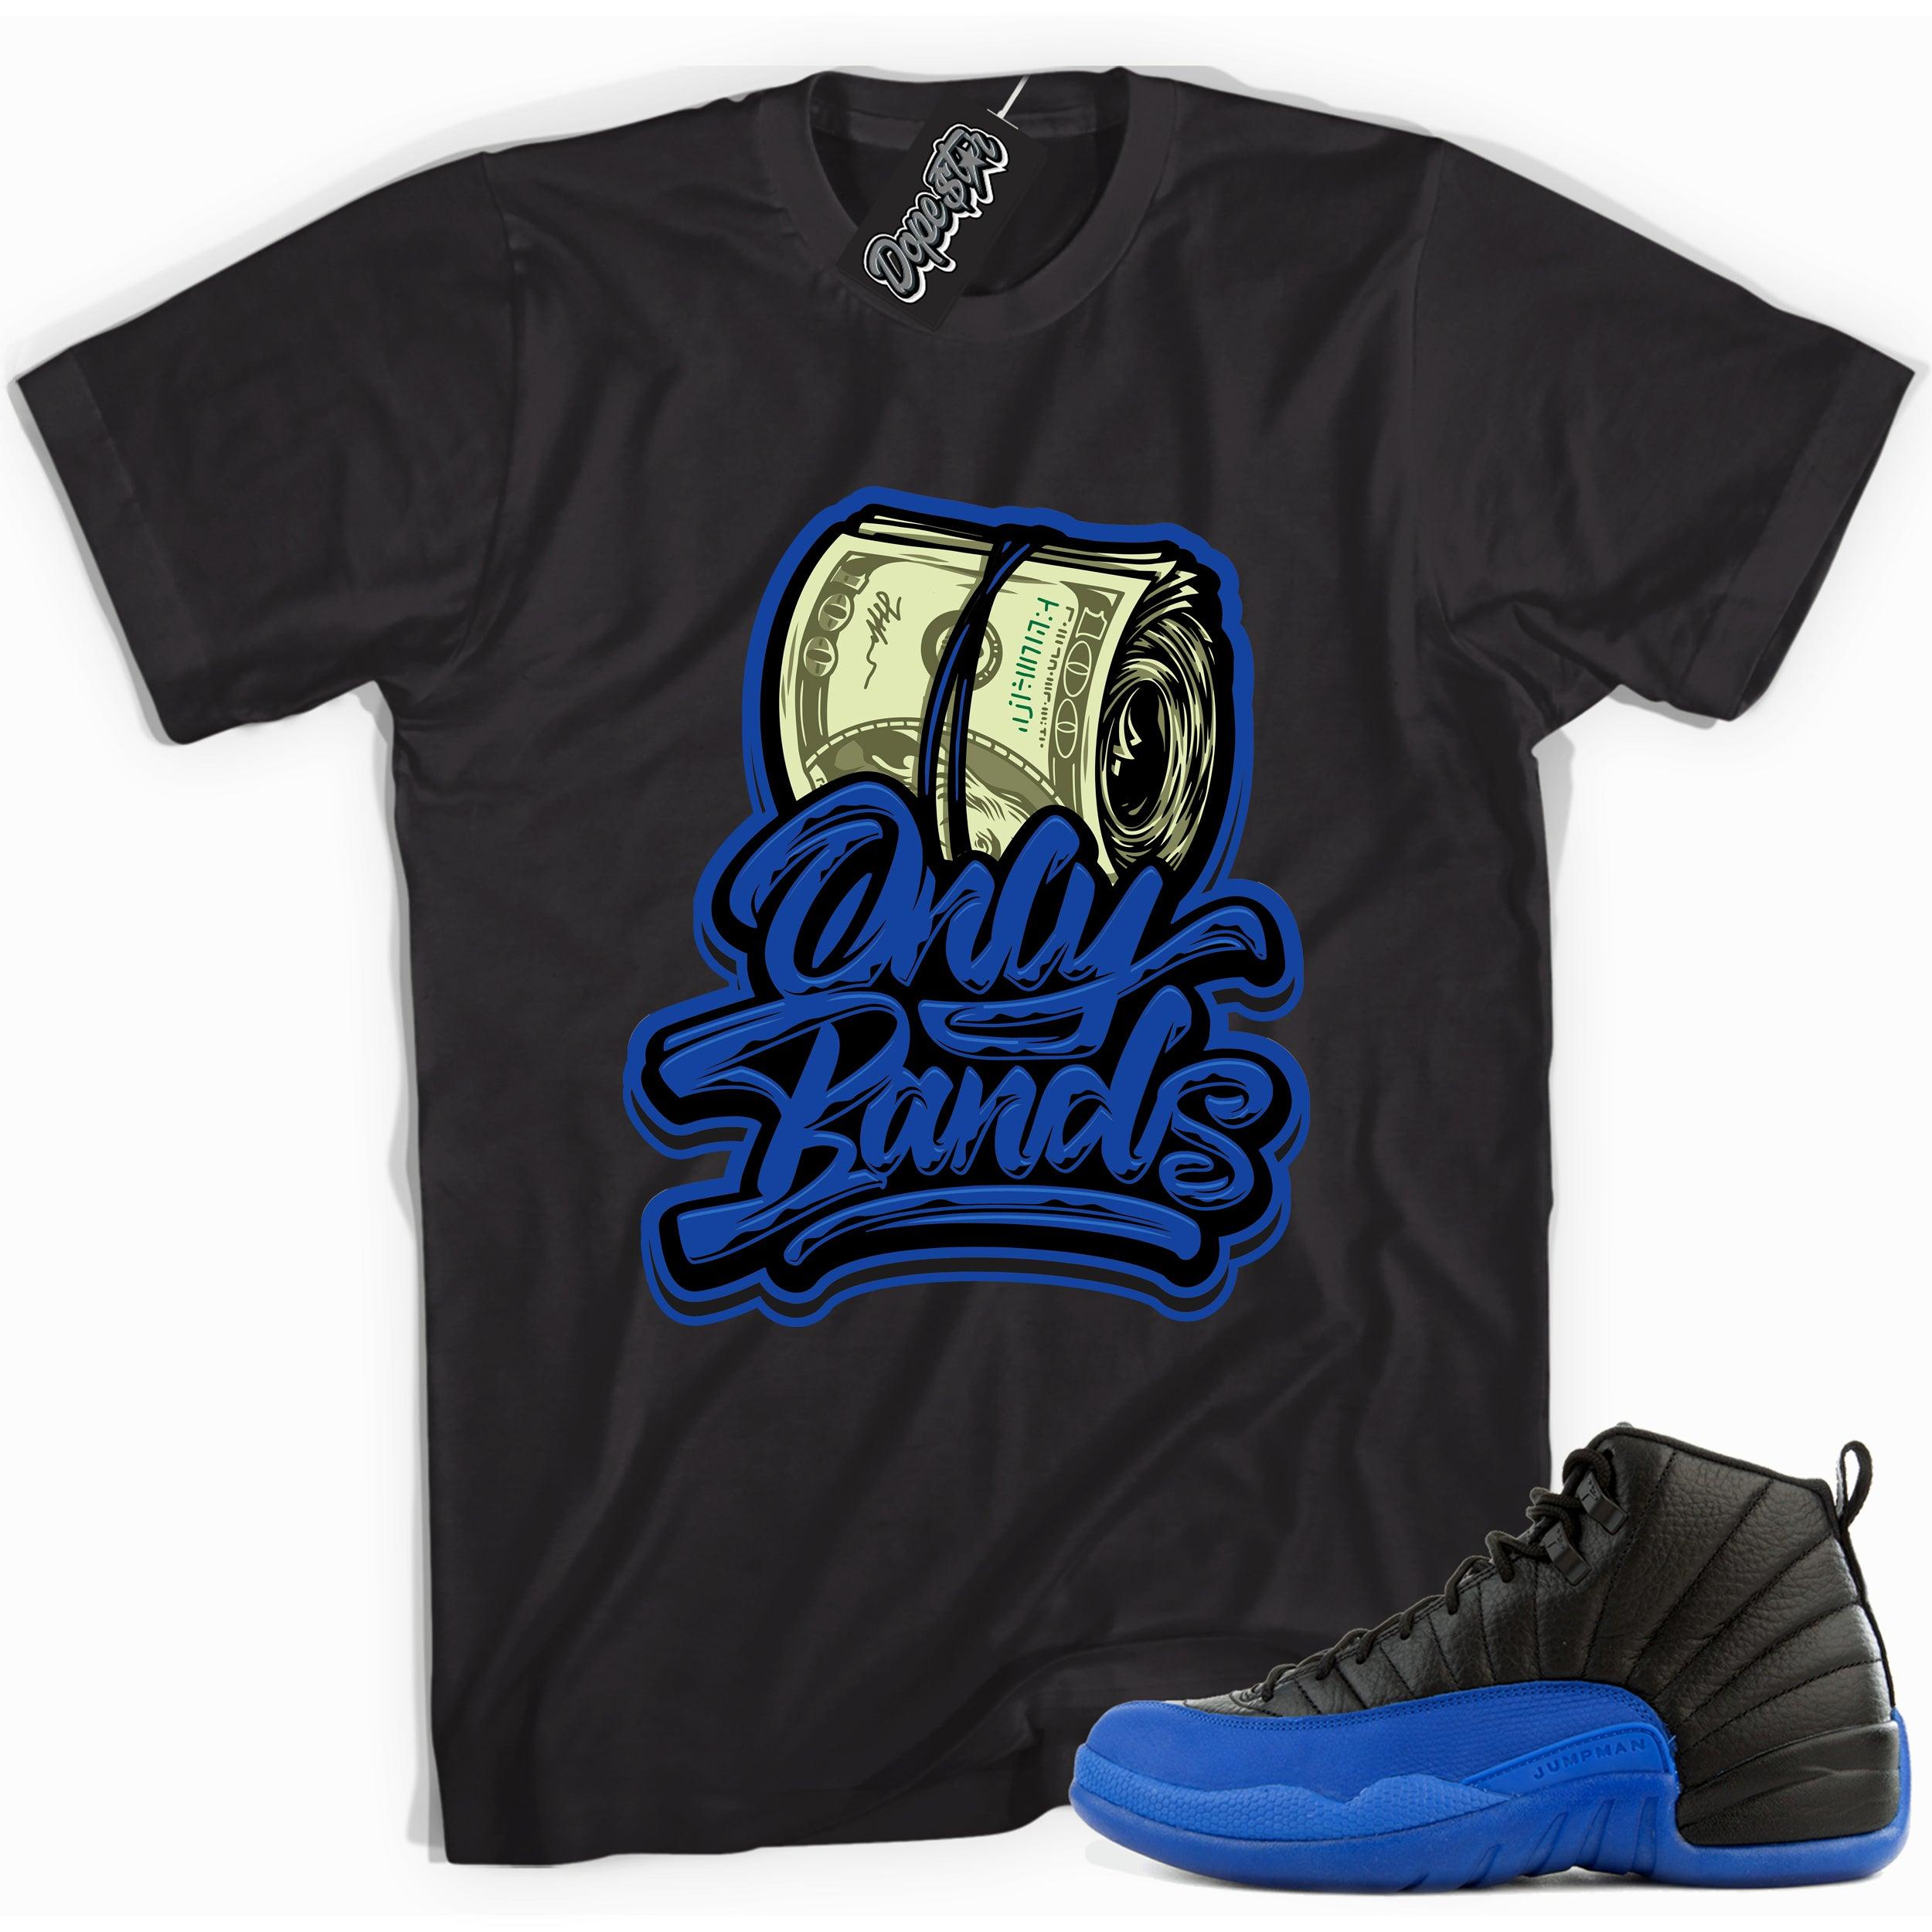 Cool black graphic tee with 'only bands' print, that perfectly matches  Air Jordan 12 Retro Black Game Royal sneakers.